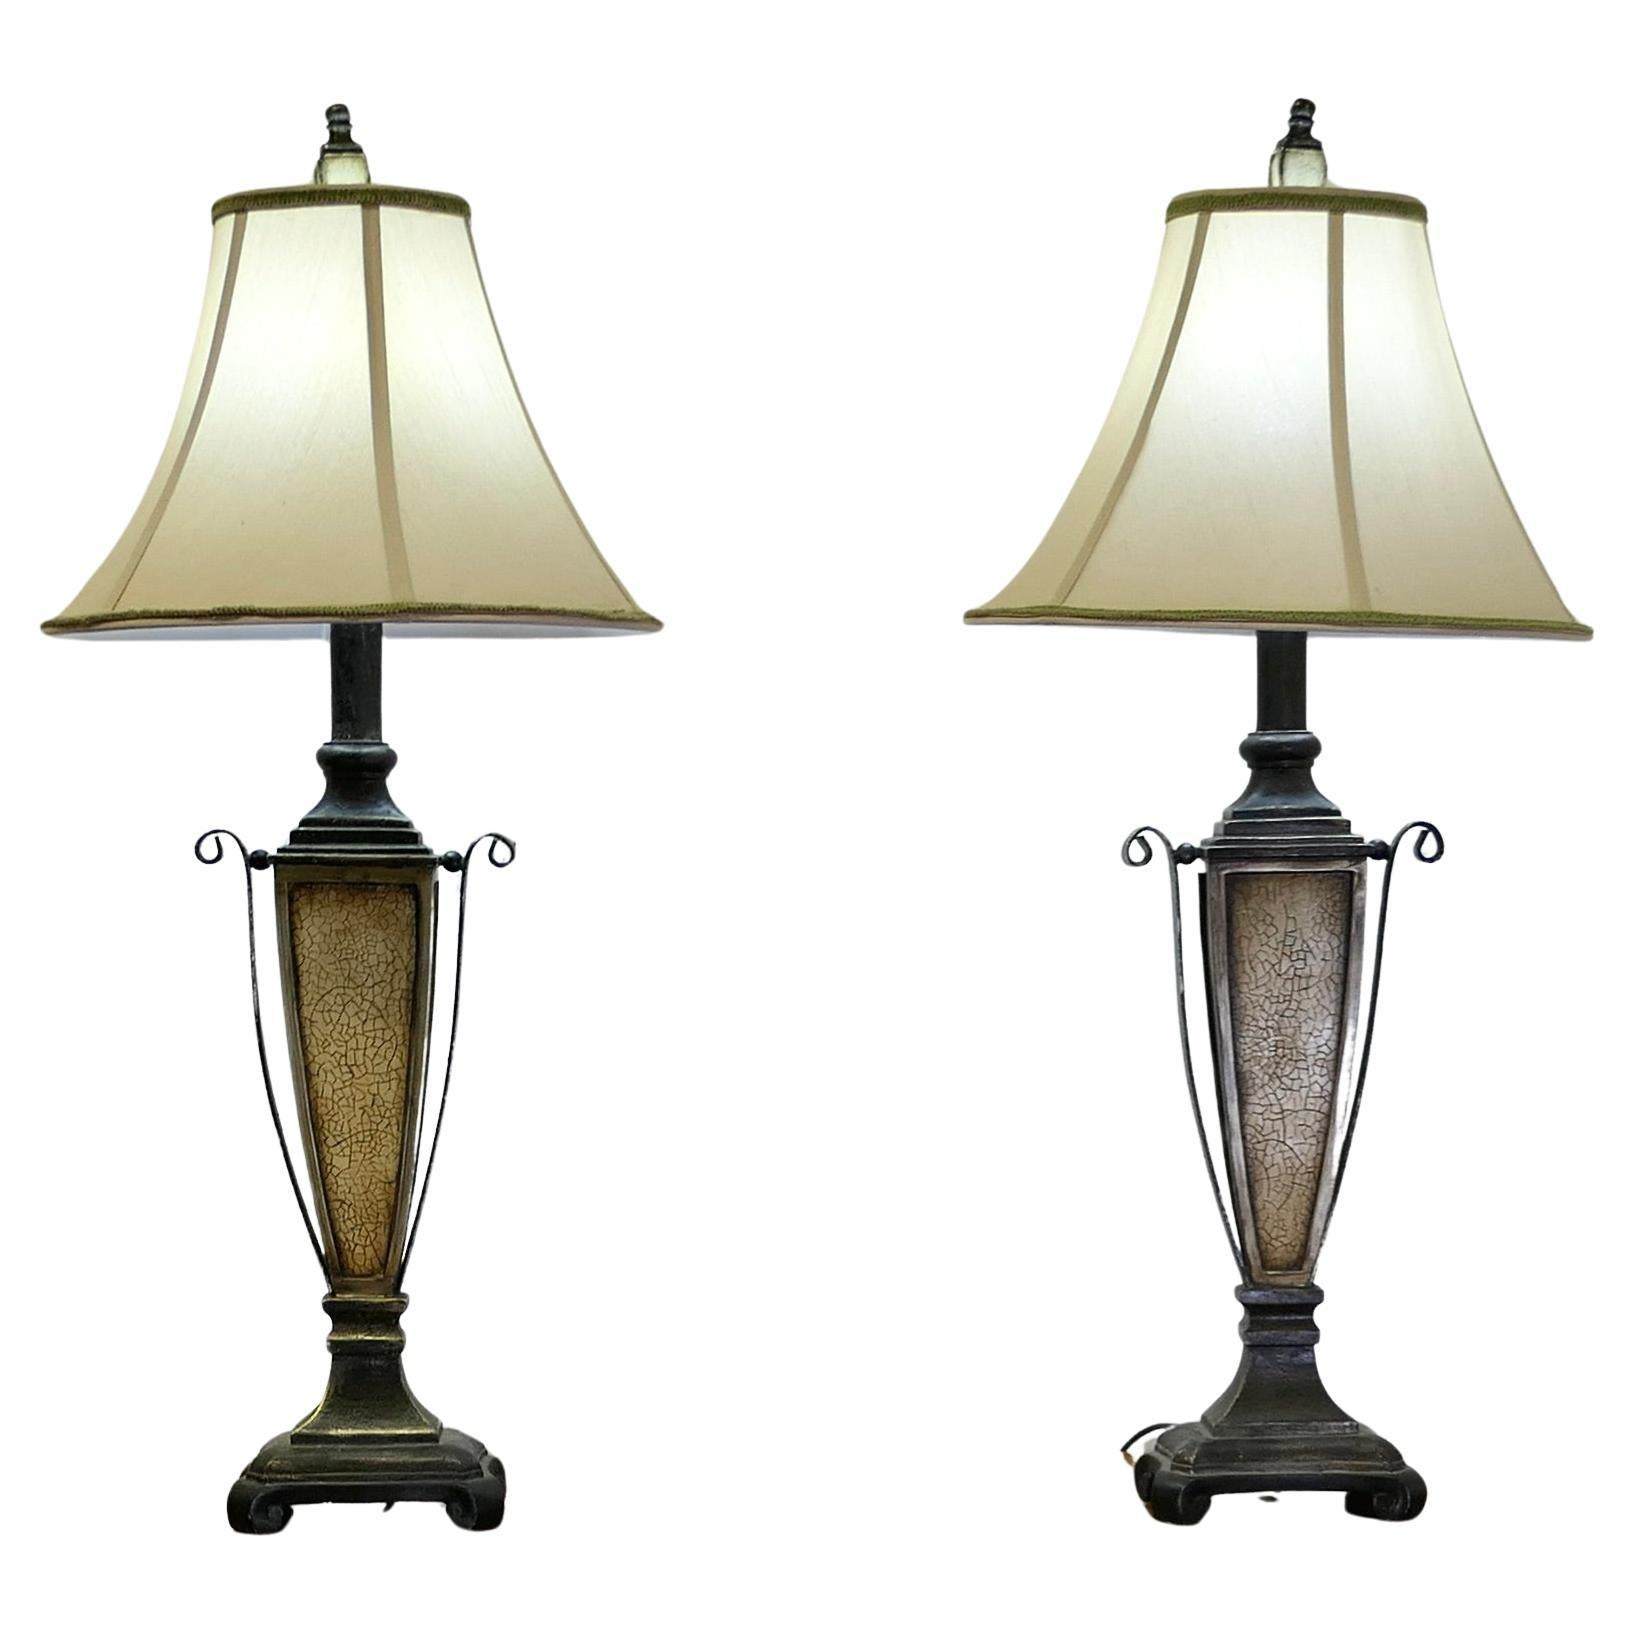 Pair of Decorative Art Deco Style Table Lamps   An exciting pair of lamp For Sale